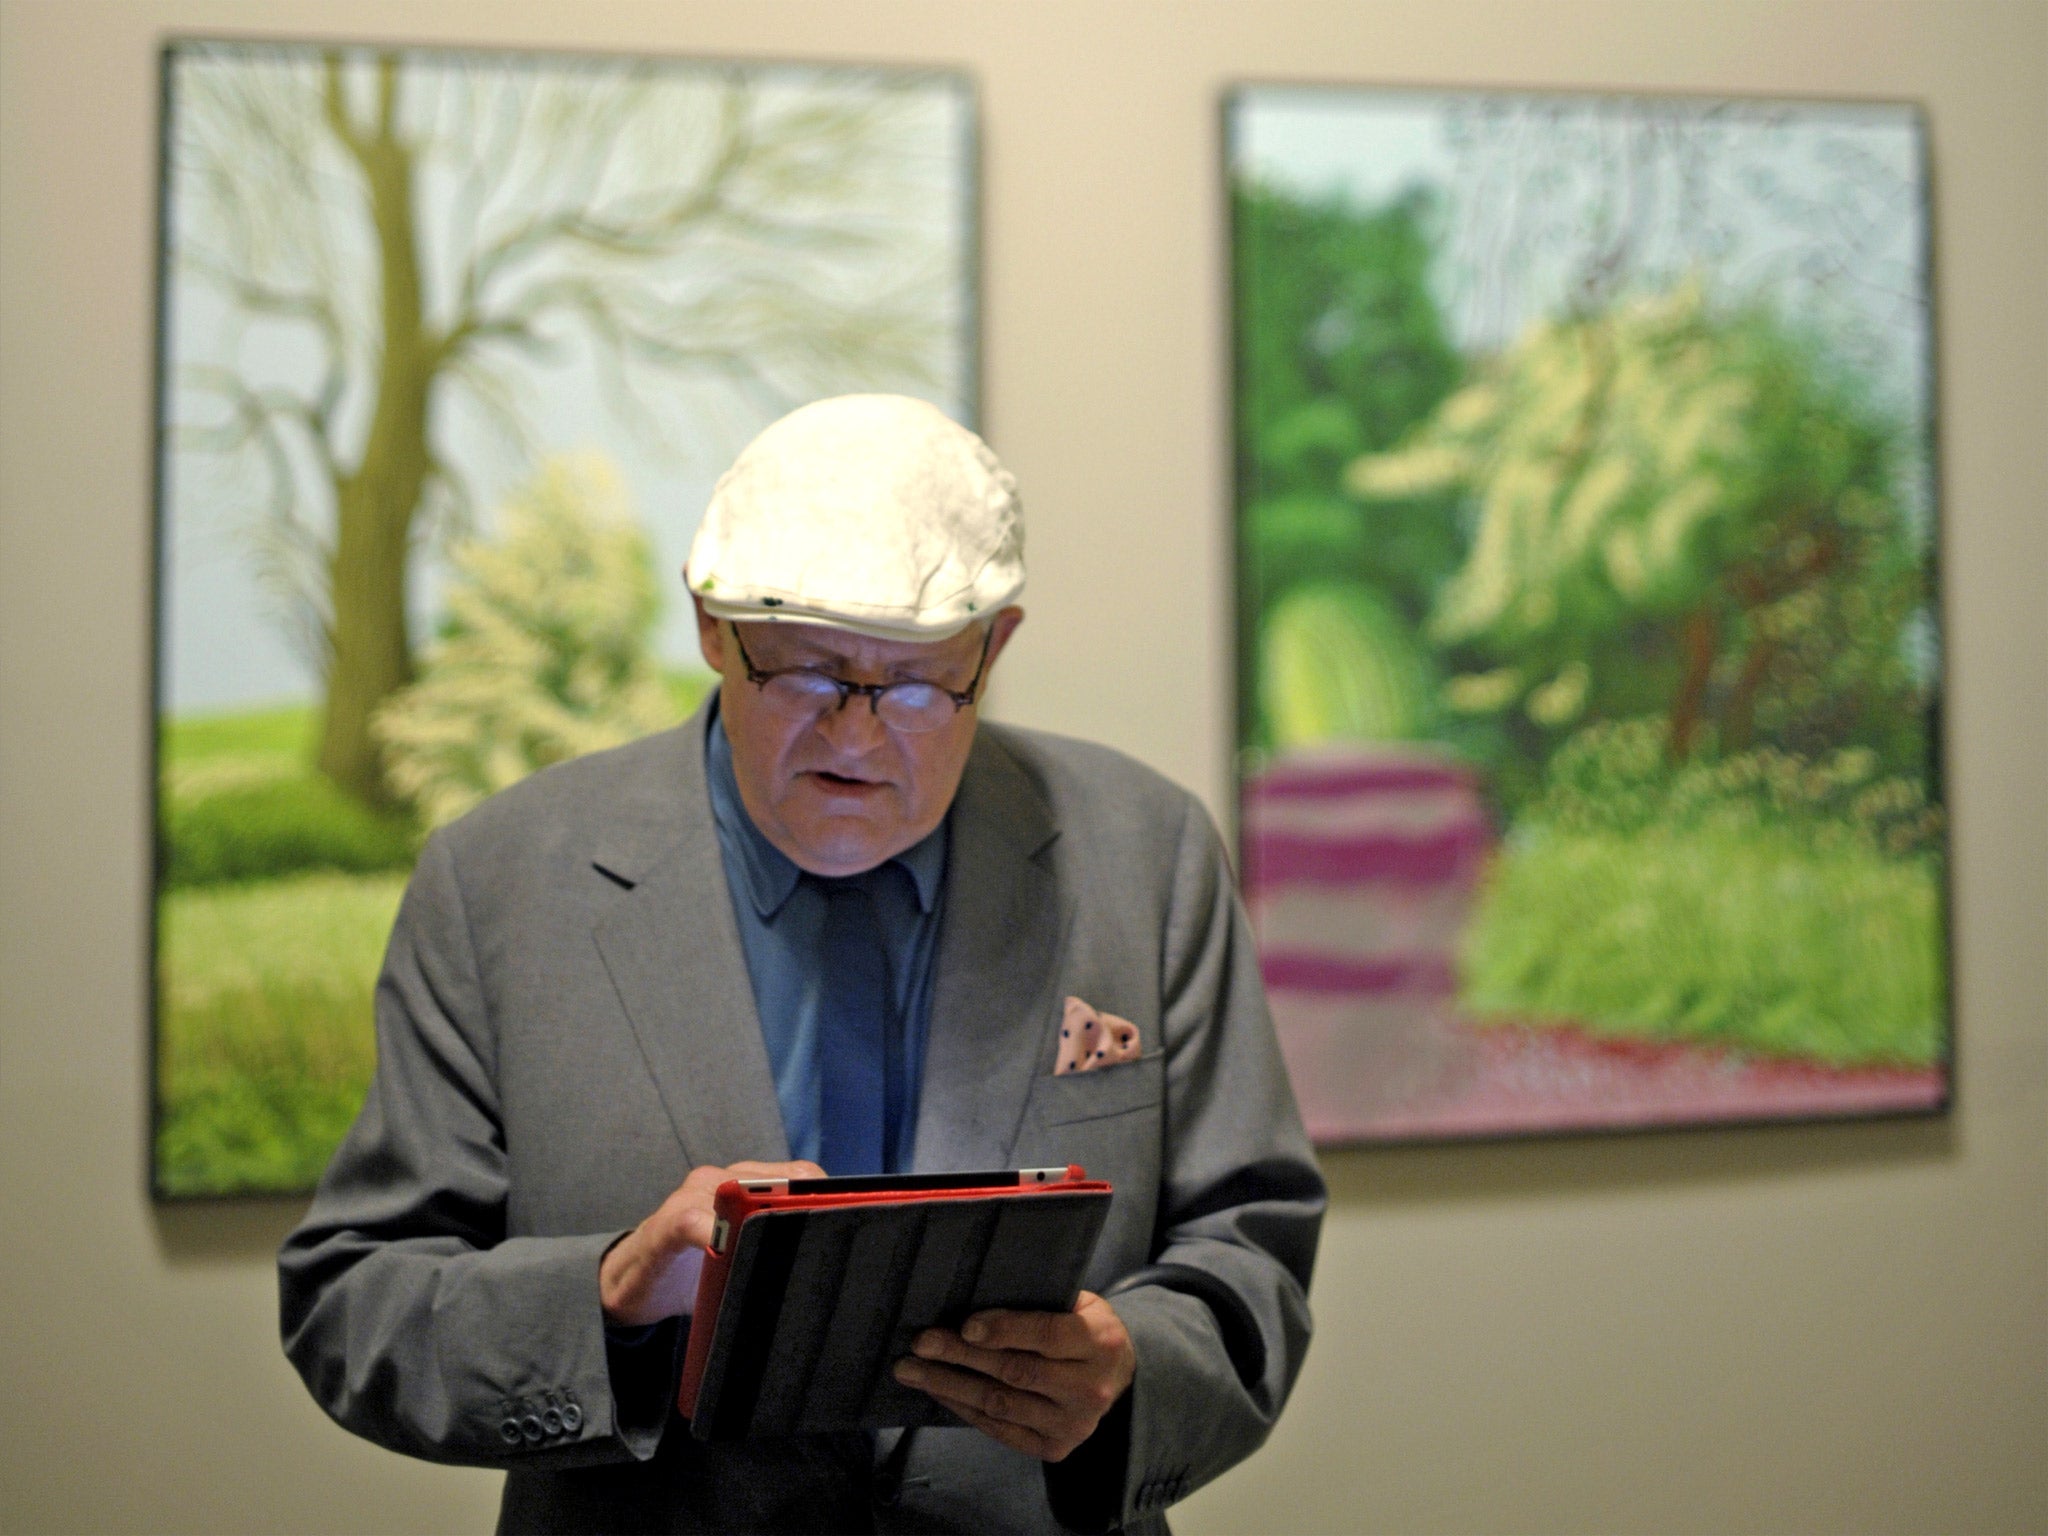 David Hockney has used an iPad to draw for ‘The New Yorker’ magazine